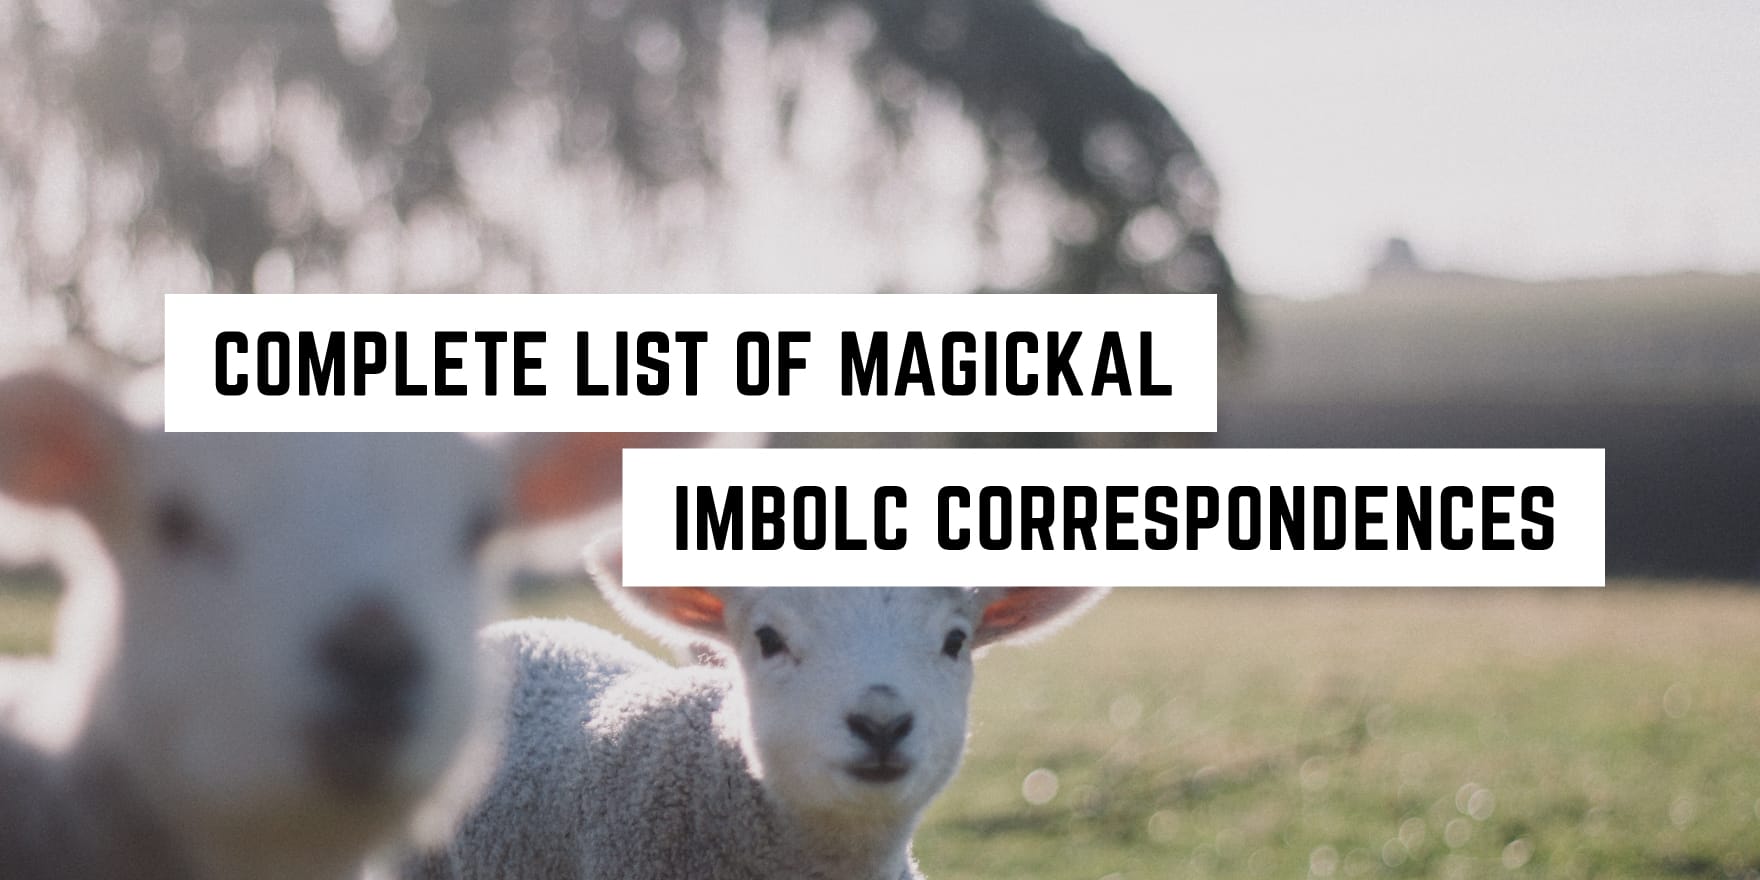 Embracing the early signs of spring: celebrating Imbolc with the spiritual presence of lambs.